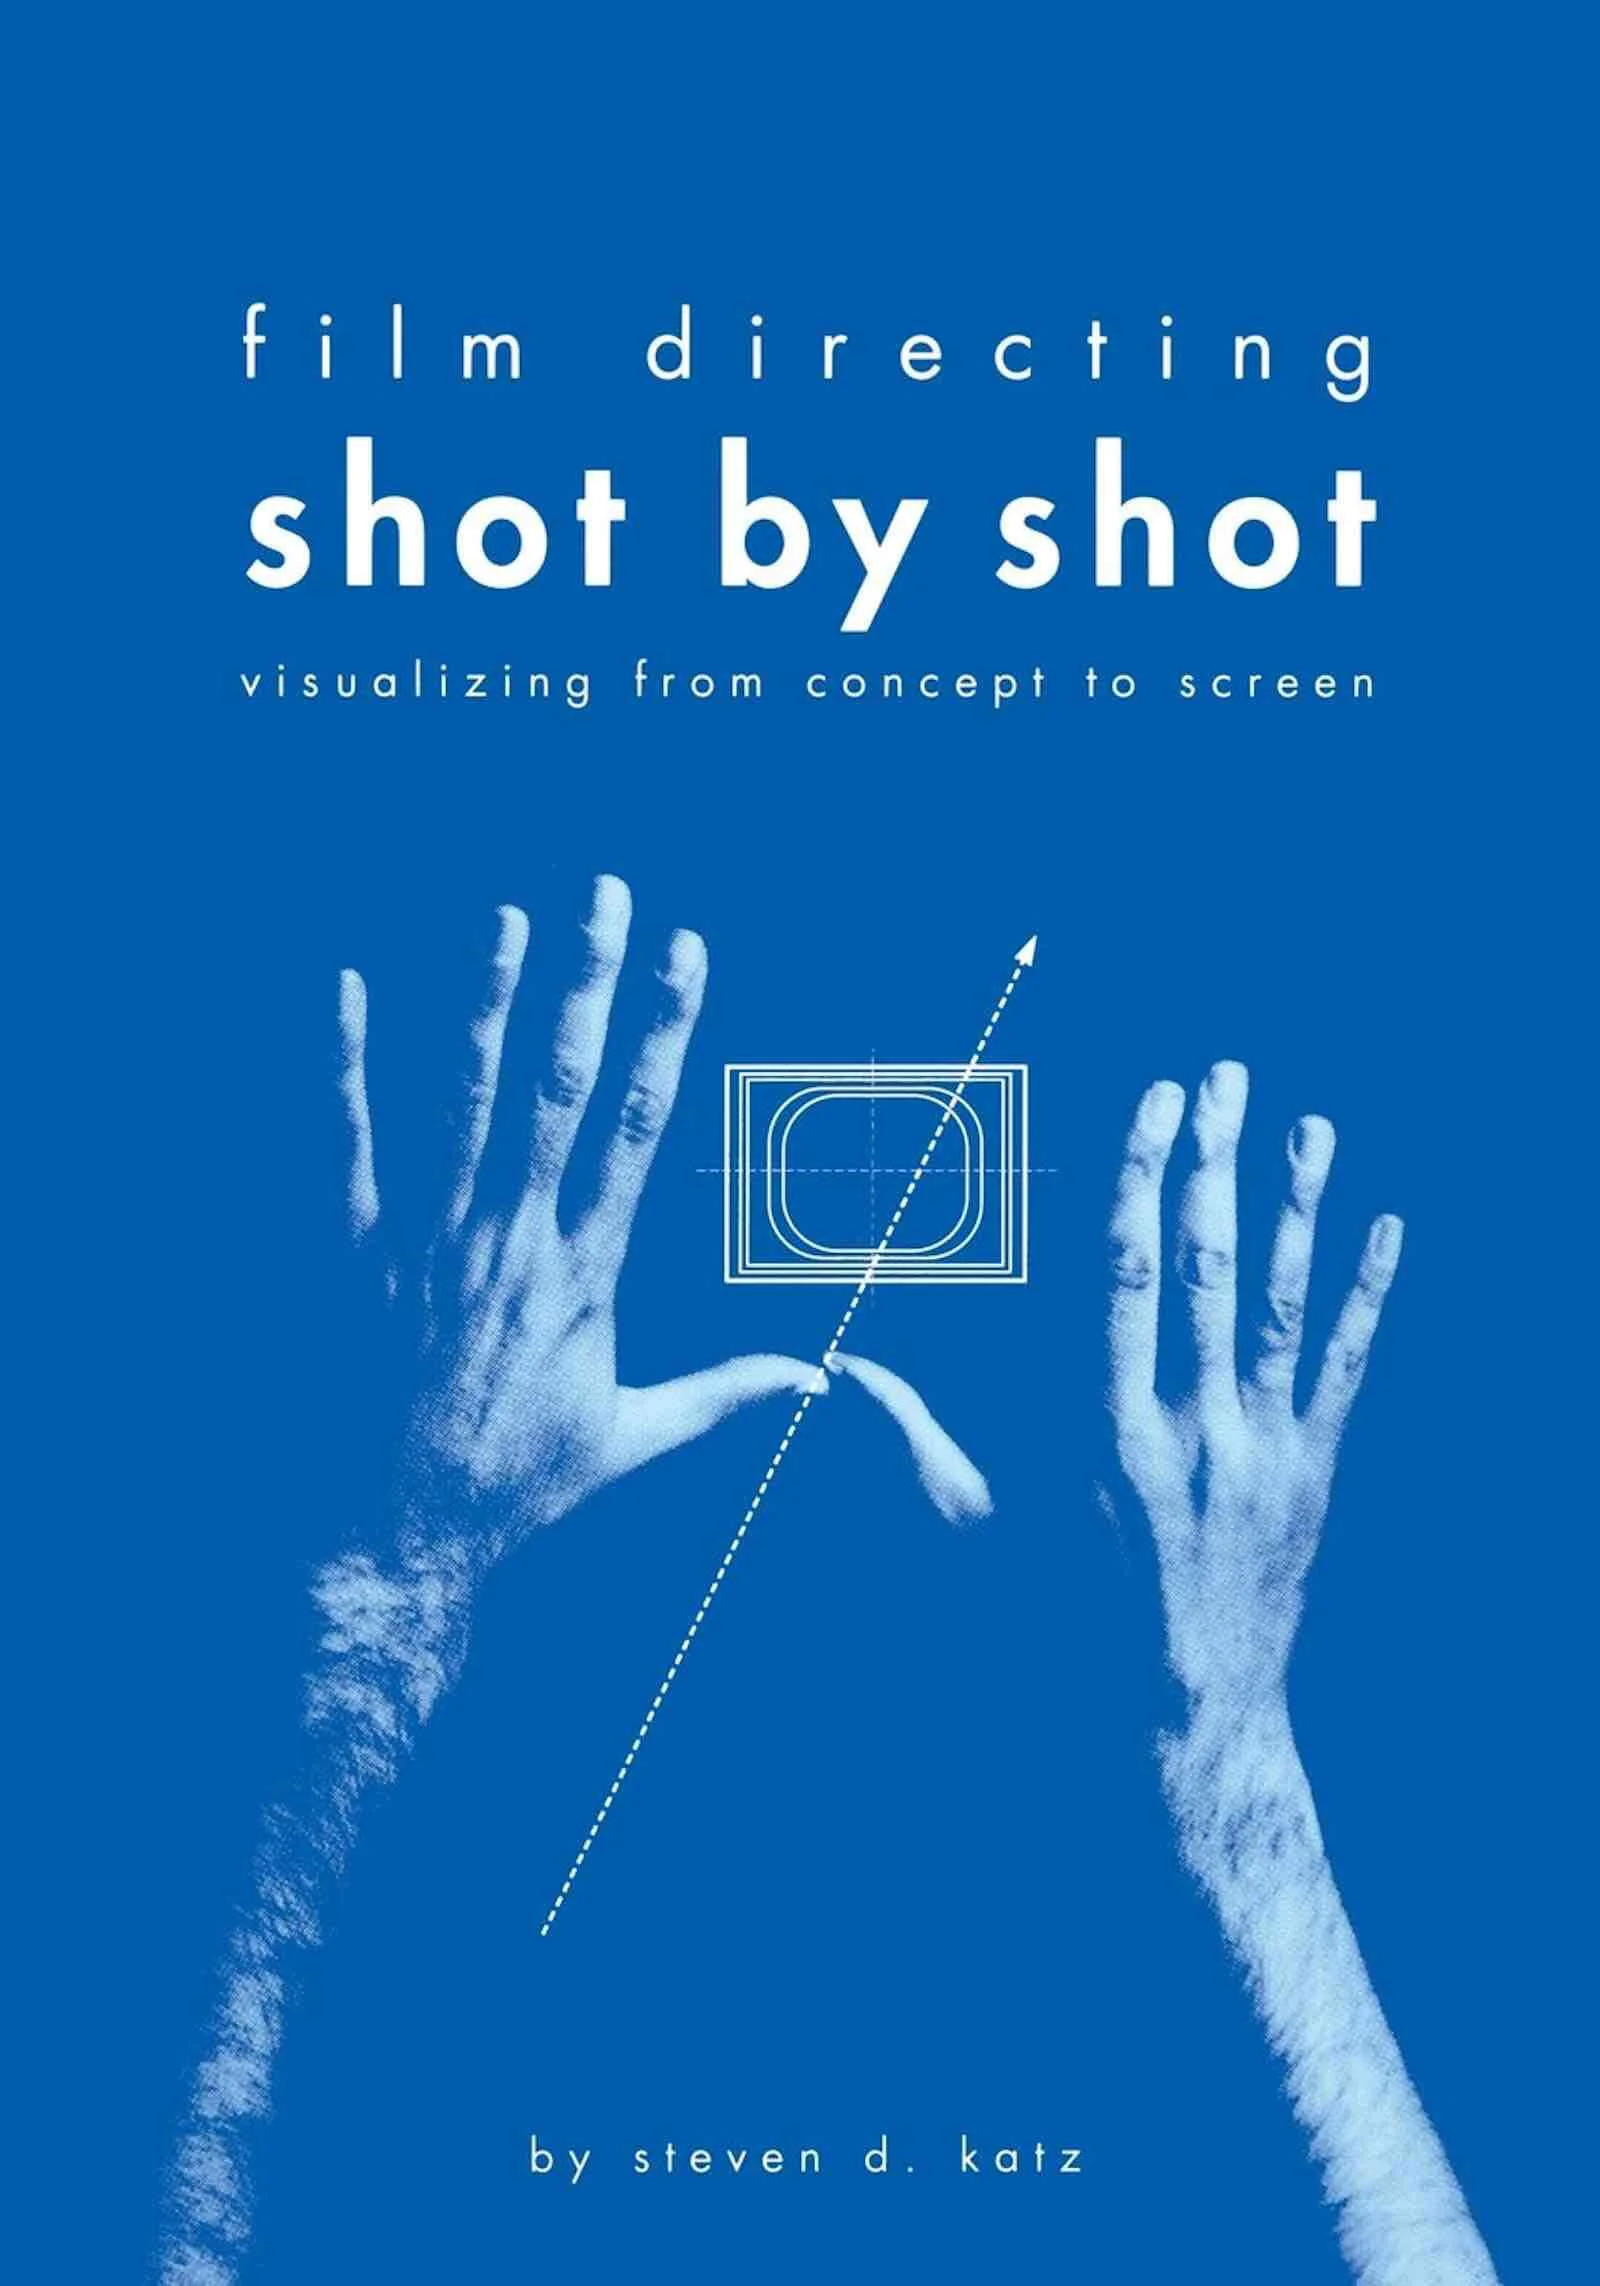 Essential Cinematography Books - Shot by Shot